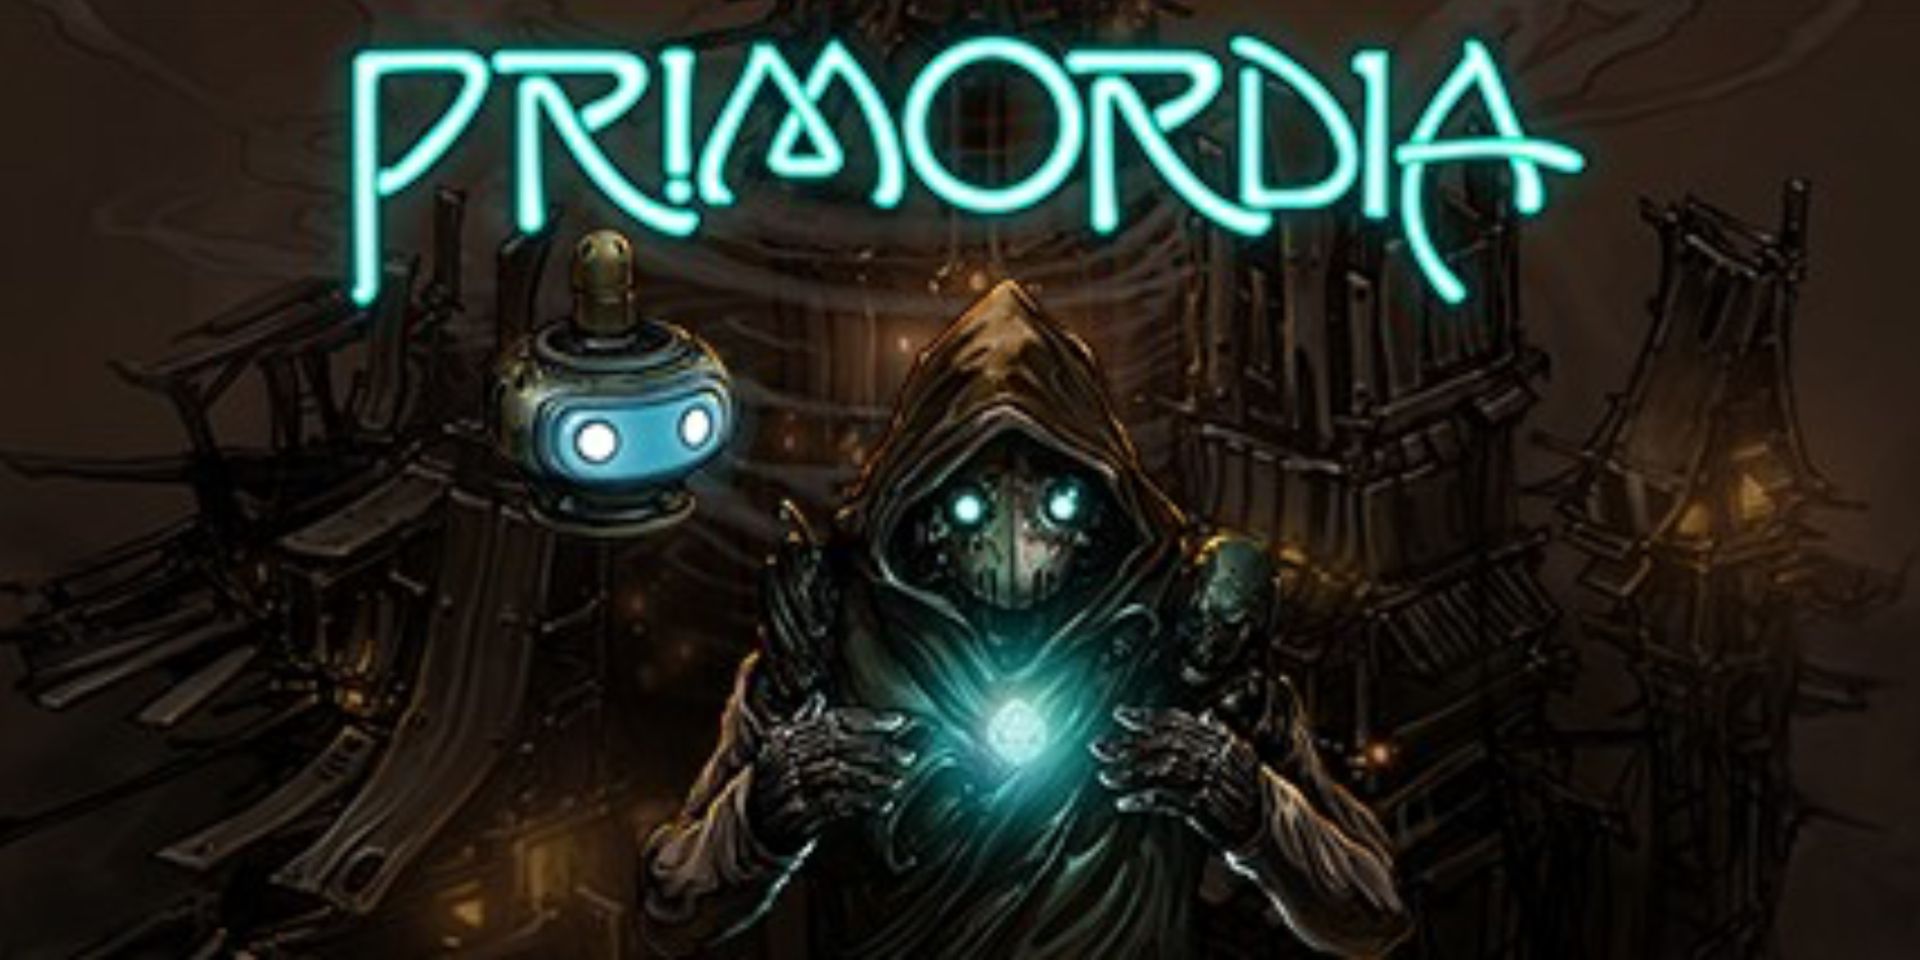 Two AI beings look at a glowing light from the game Primordia